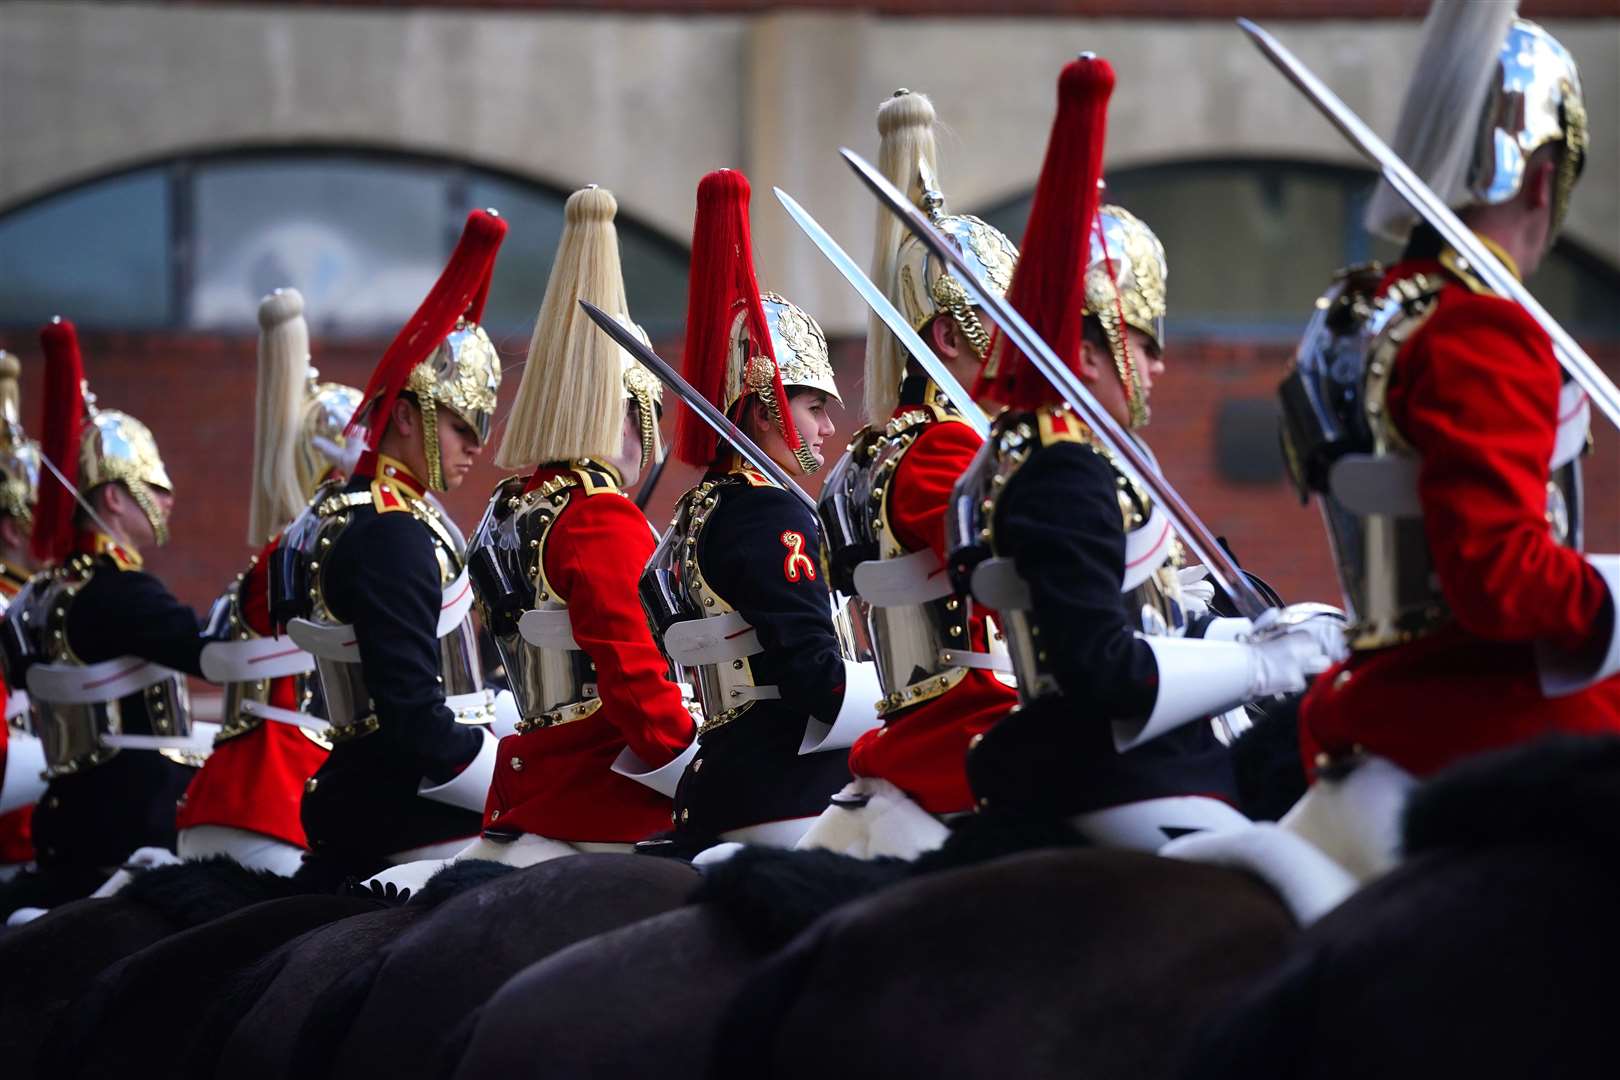 Troopers pose for a group photograph after the judging (Victoria Jones/PA)